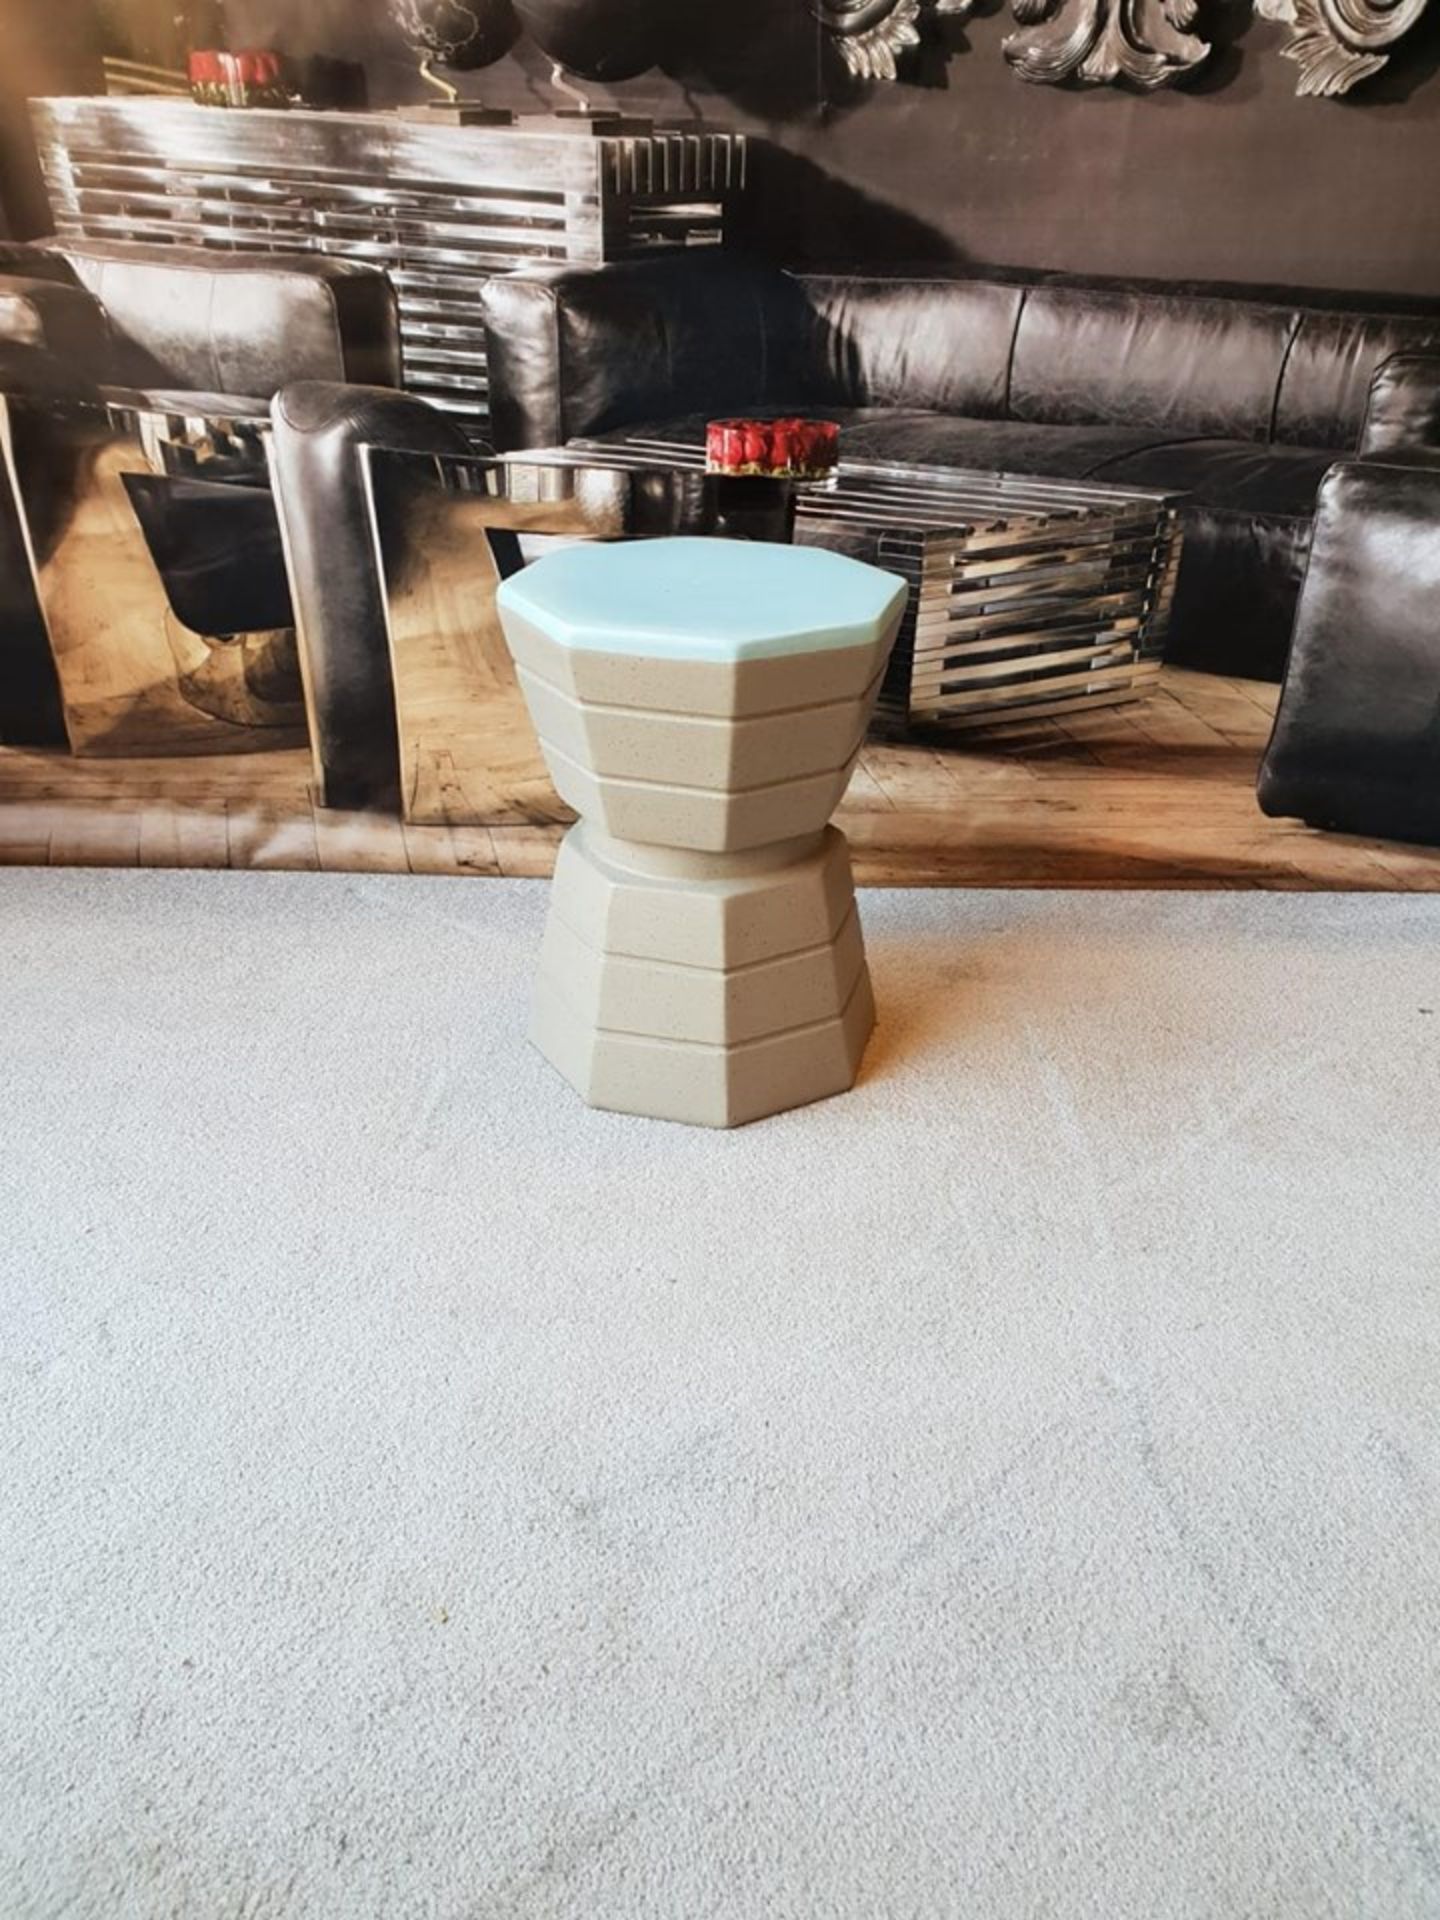 Tracey Boyd Concrete Barrista Stool Blue Top 40 x 56cm MSRP £174